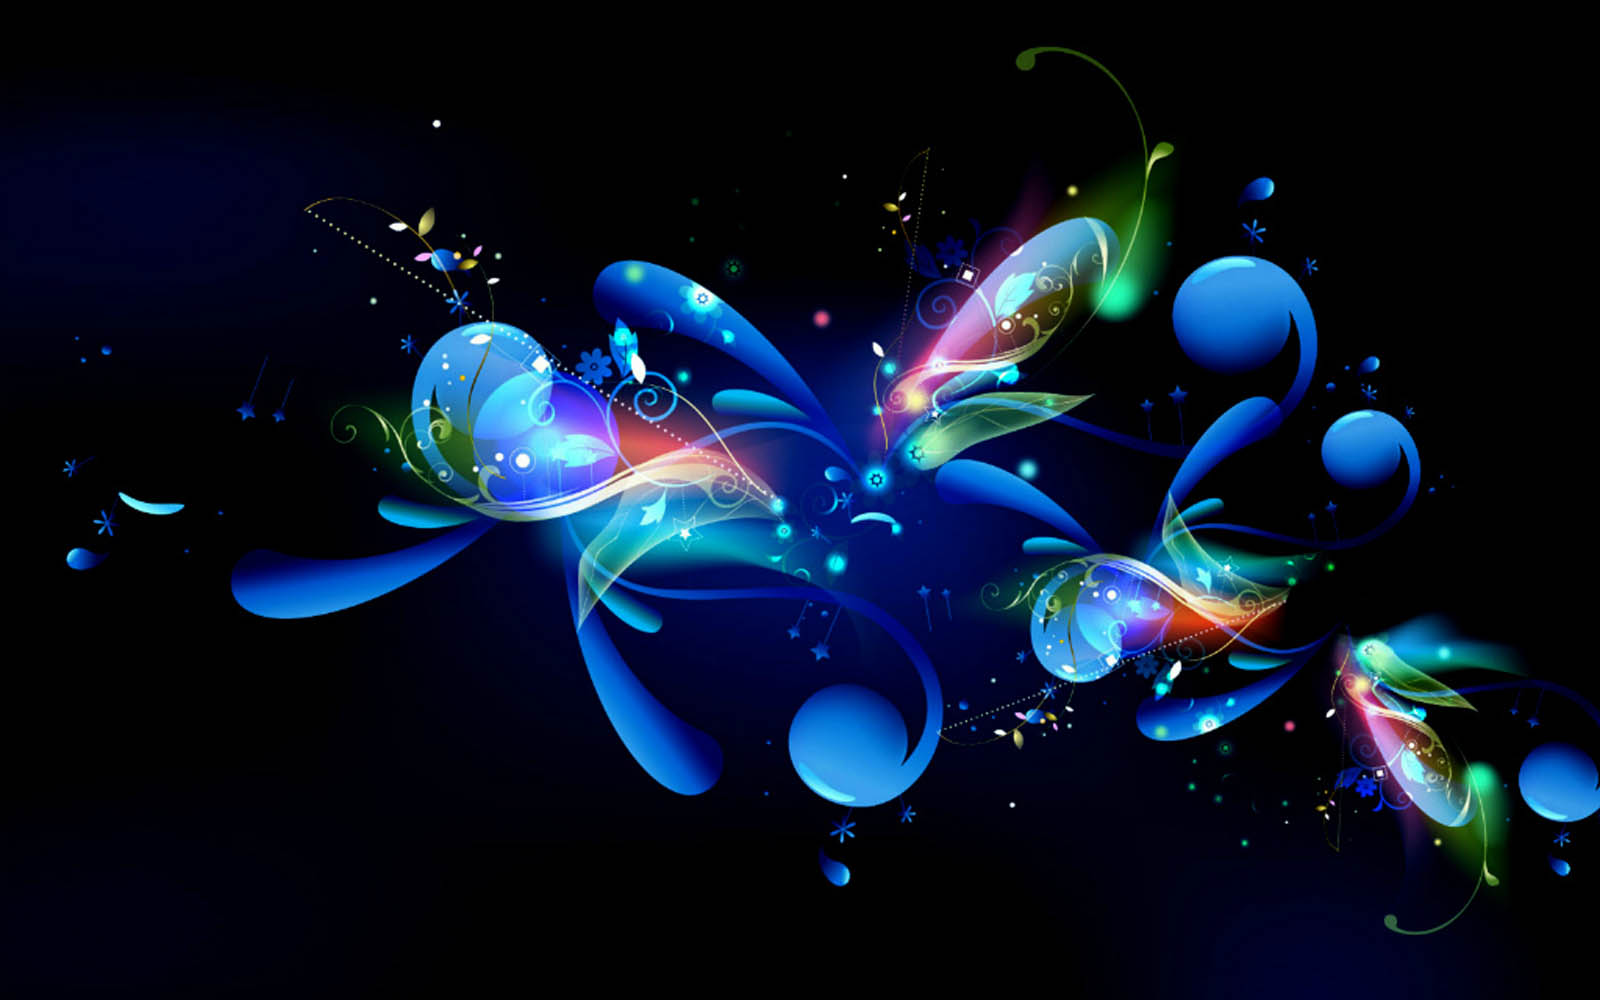  Abstract Wallpapers BackgroundsPhotos Images and Pictures for 1600x1000